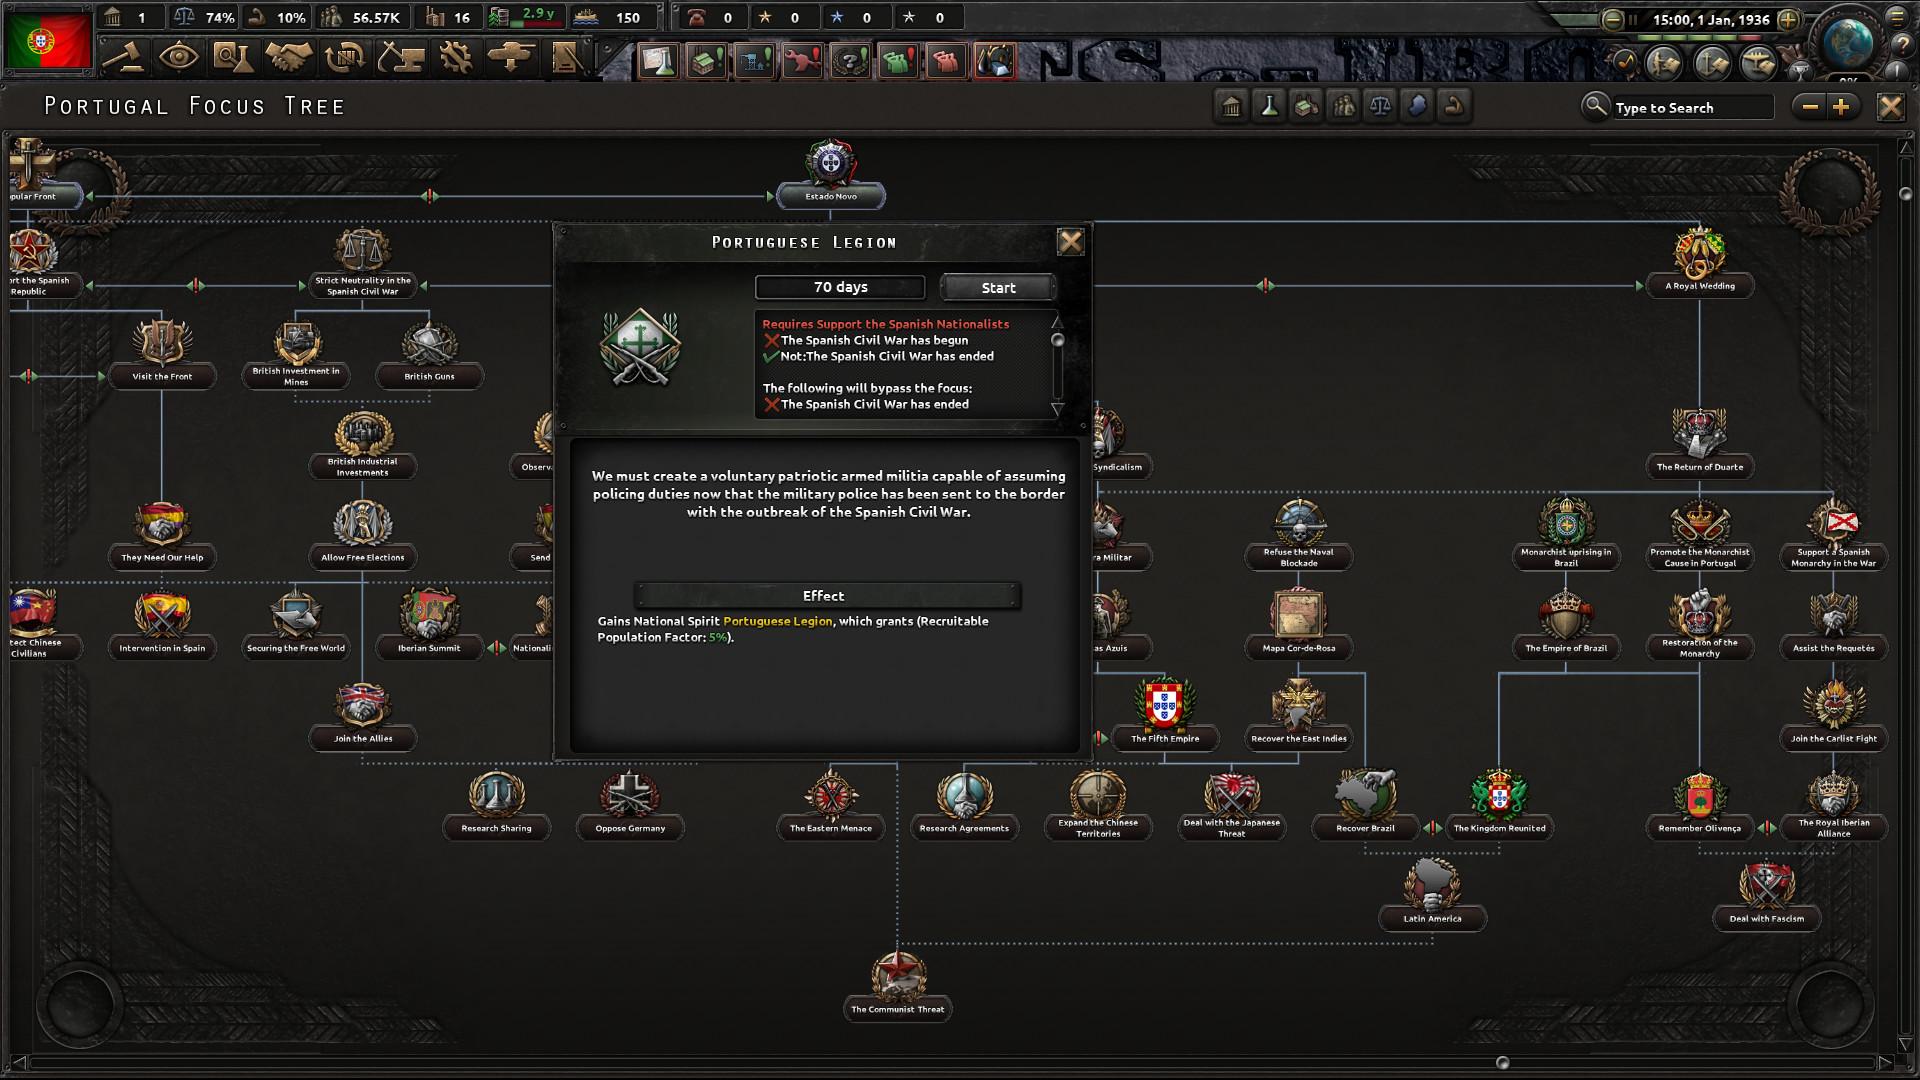 https://media.imgcdn.org/repo/2023/05/expansion-hearts-of-iron-iv-la-resistance/6463642733b4b-expansion-hearts-of-iron-iv-la-resistance-screenshot2.jpg